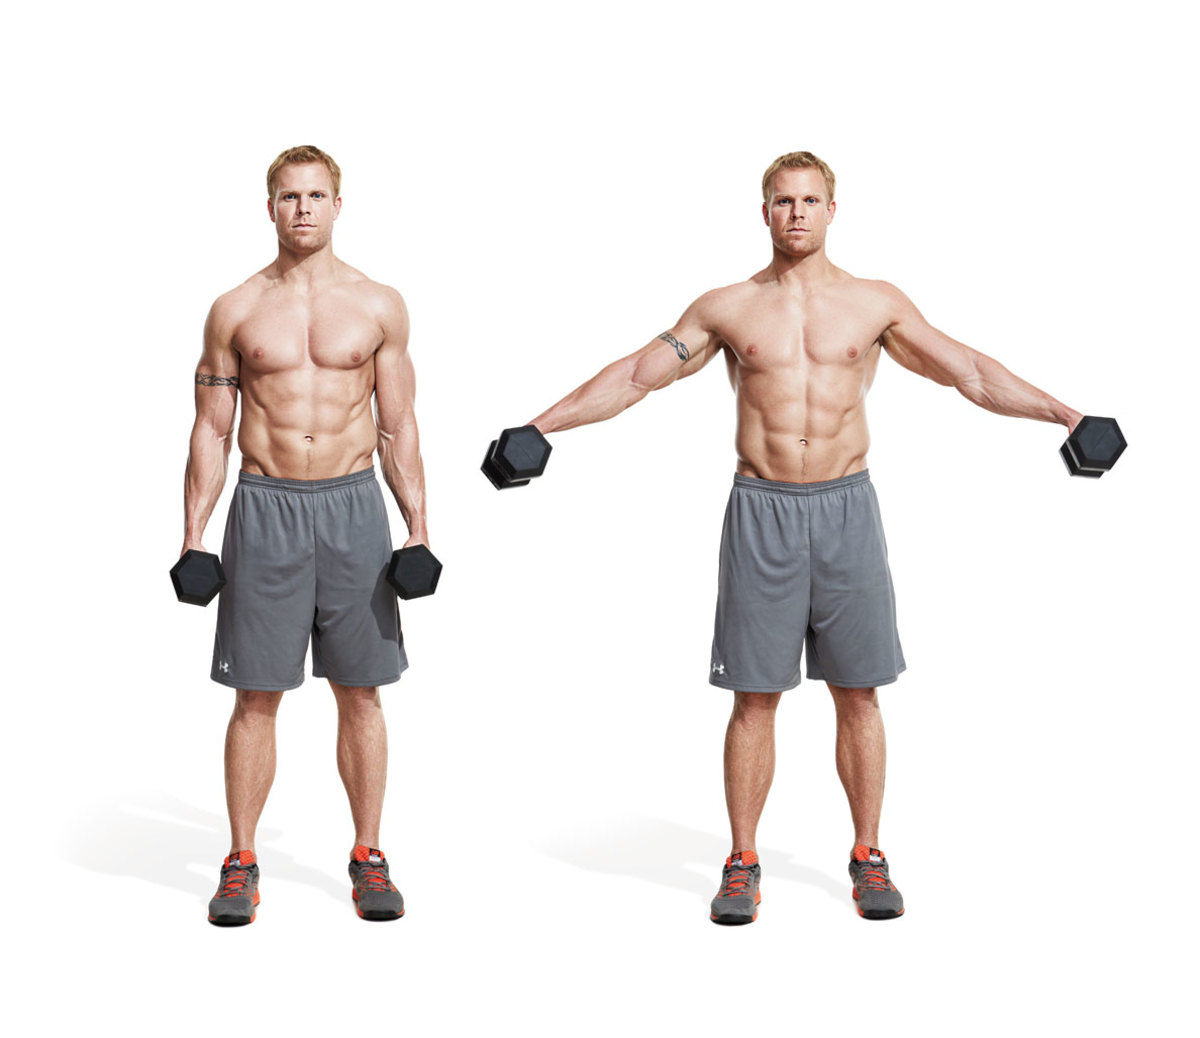 Shoulder Workouts - Best Exercises For Muscle & Strength